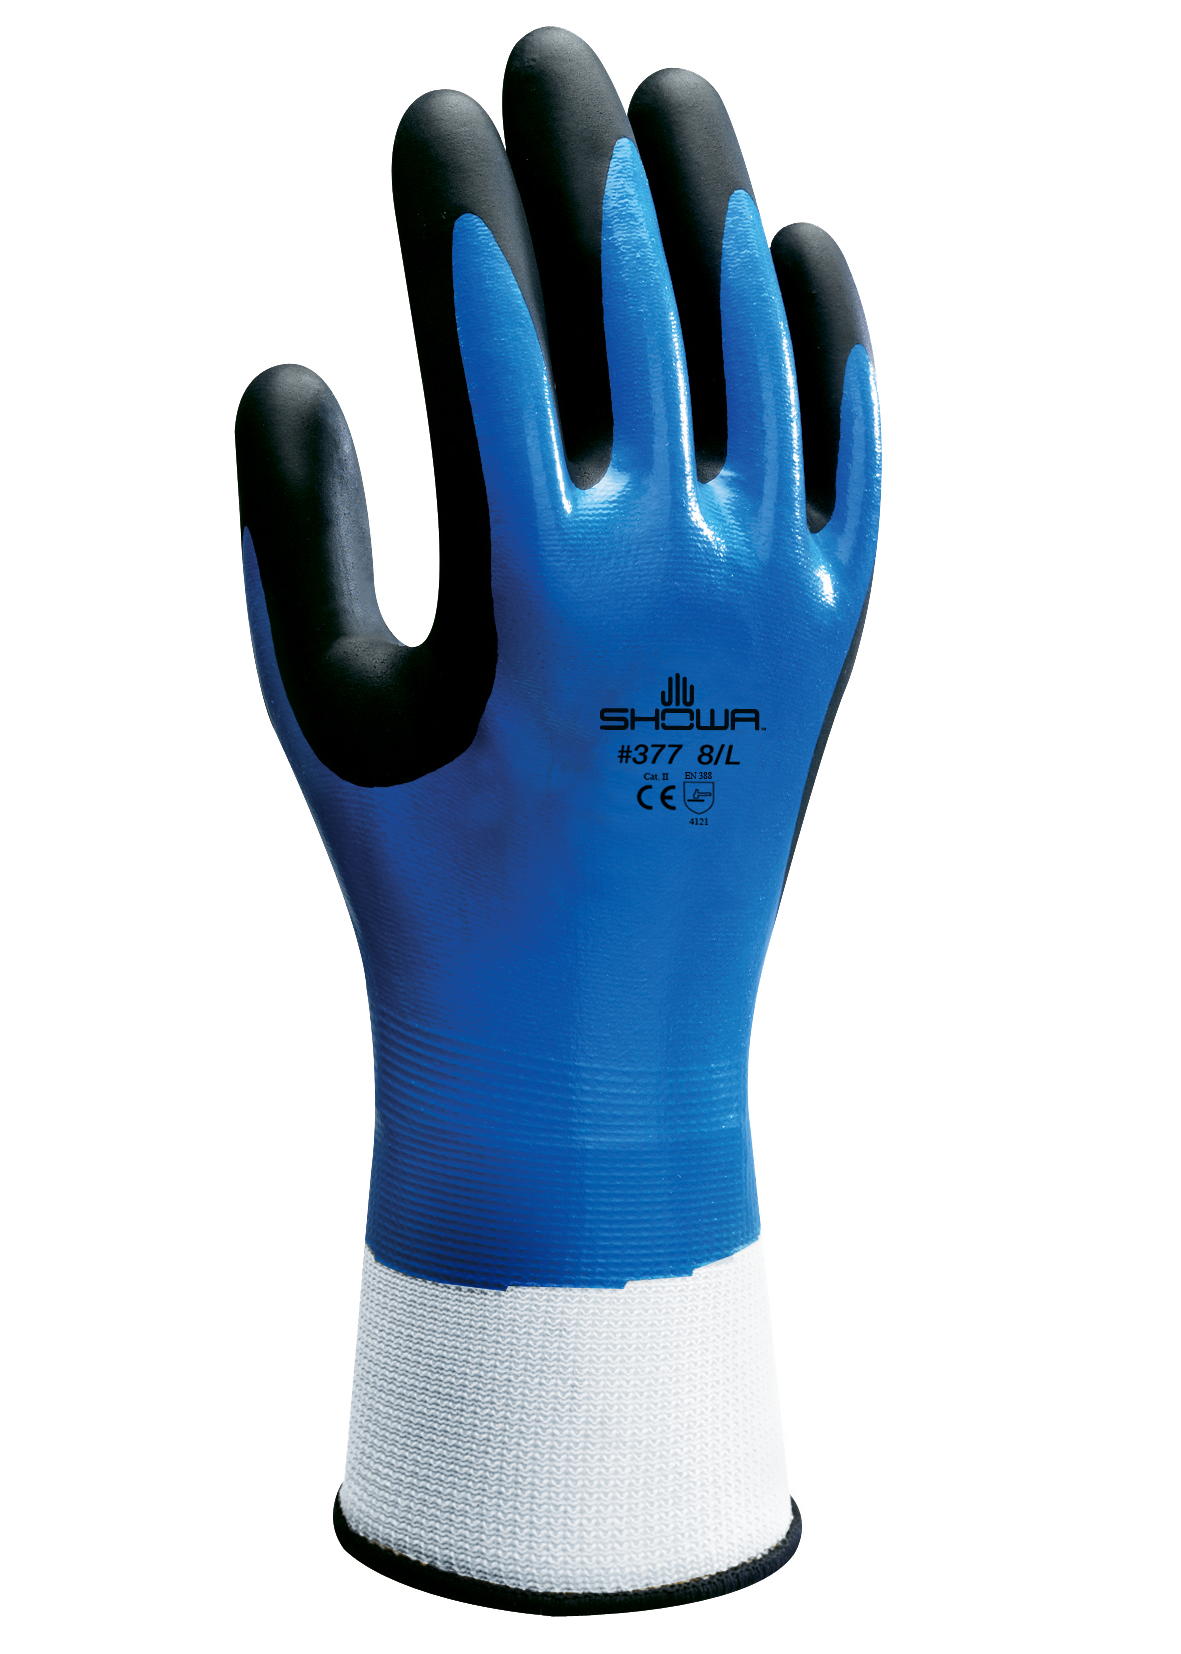 Double dipped, full coated, with an extra foamed nitrile finish on palm.Liquid-proof to end of coated area.High abrasion resistance-EN 388 Level4